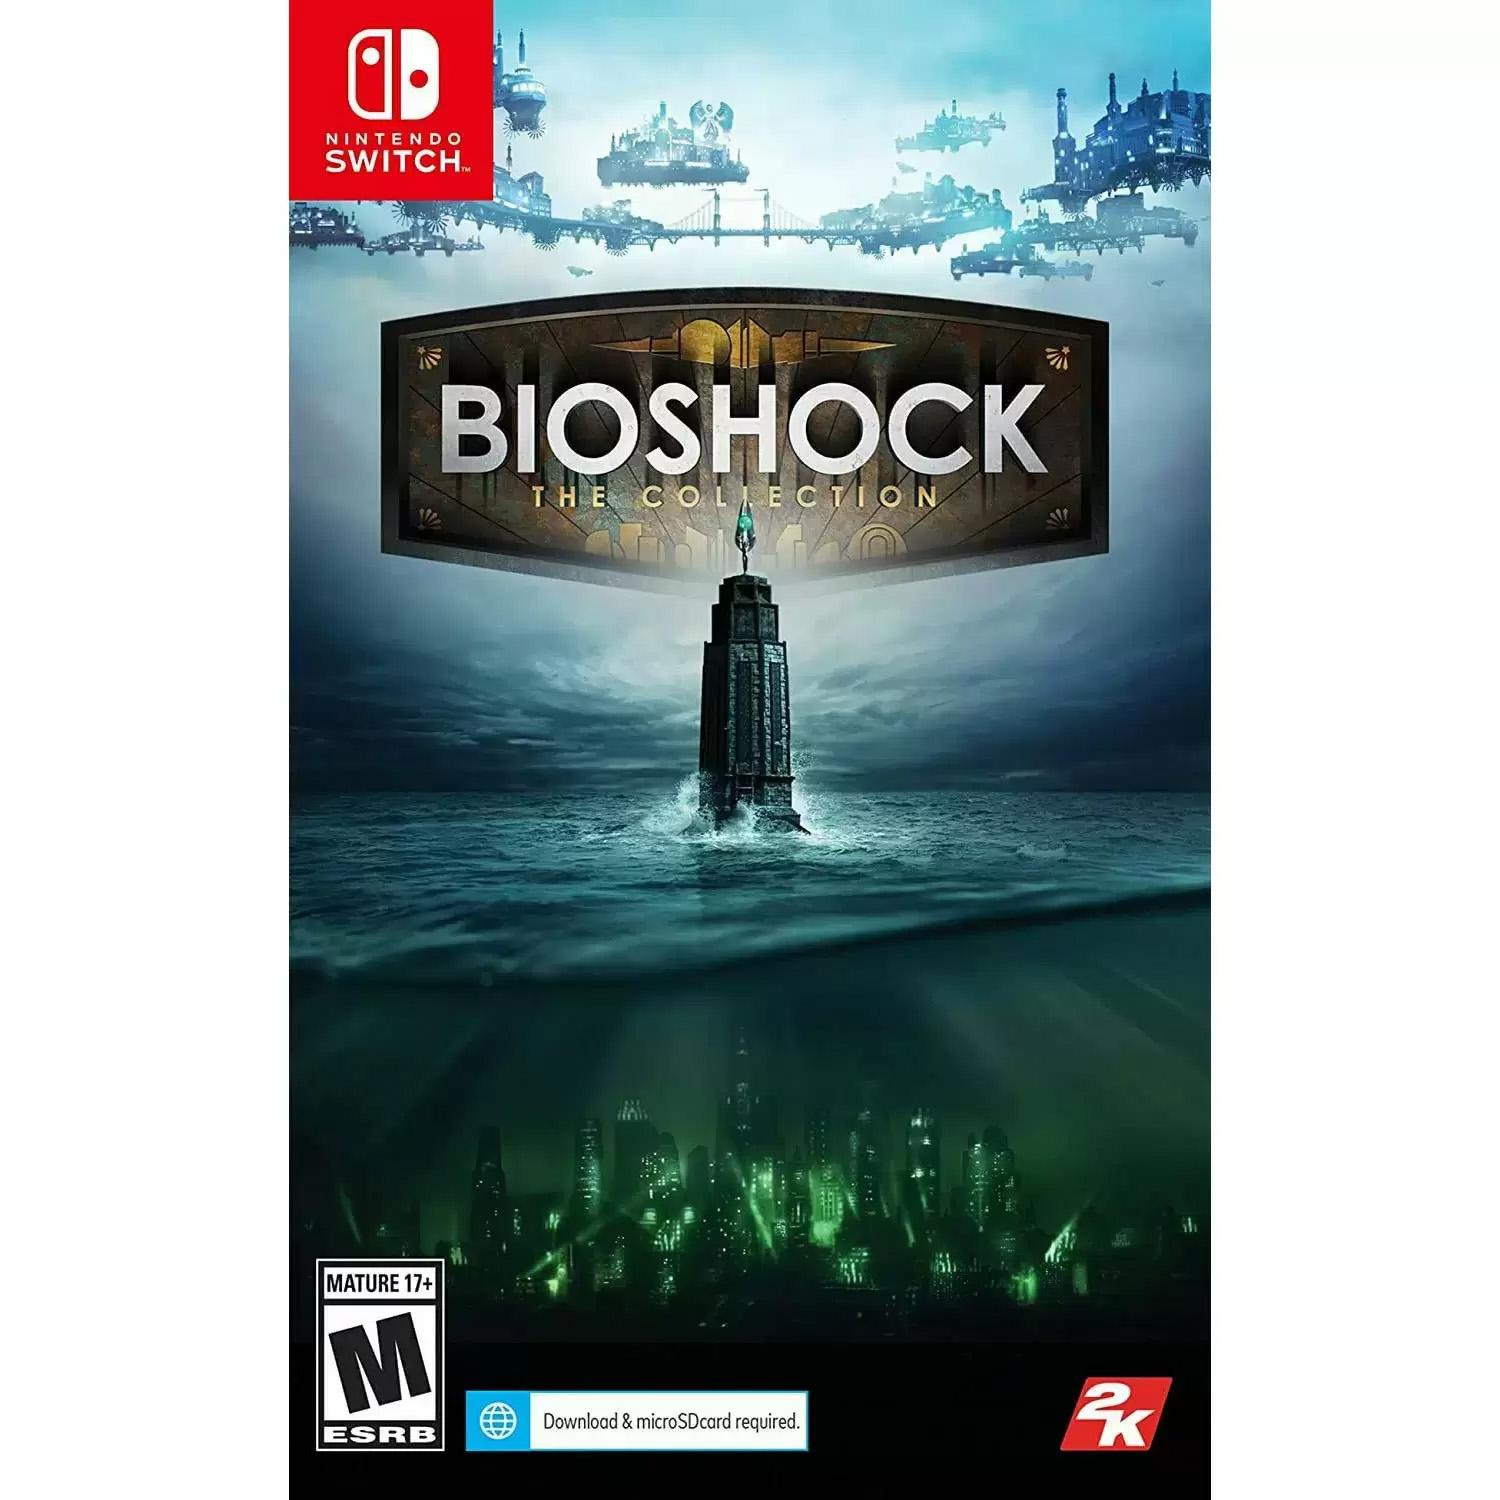 BioShock The Collection Nintendo Switch for $19.99